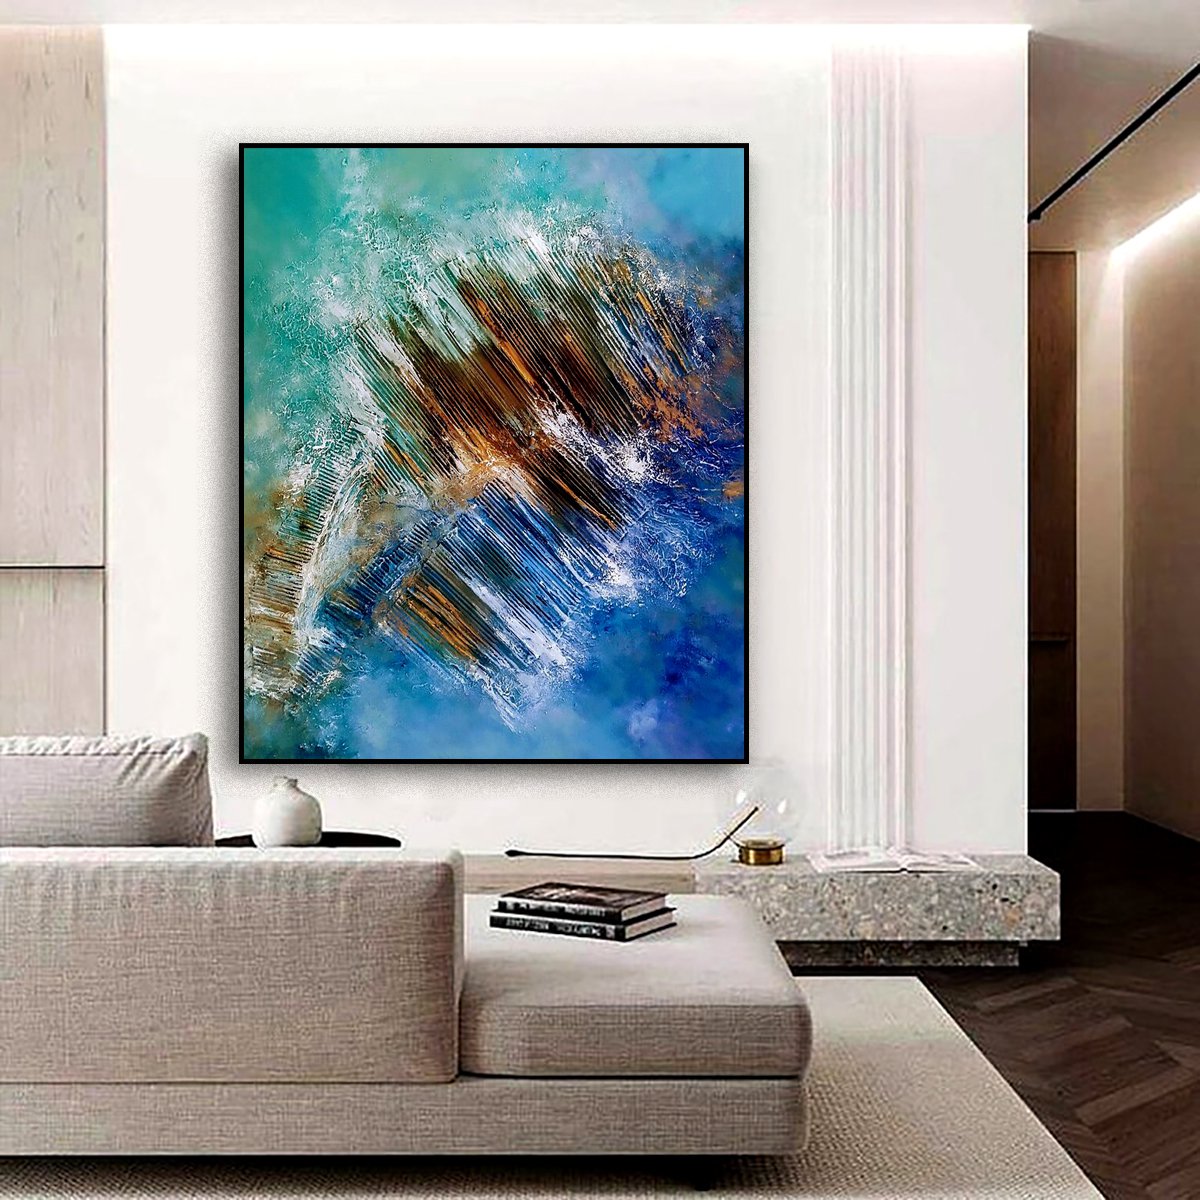 Thailand 100x120cm Abstract Textured Painting by Alexandra Petropoulou